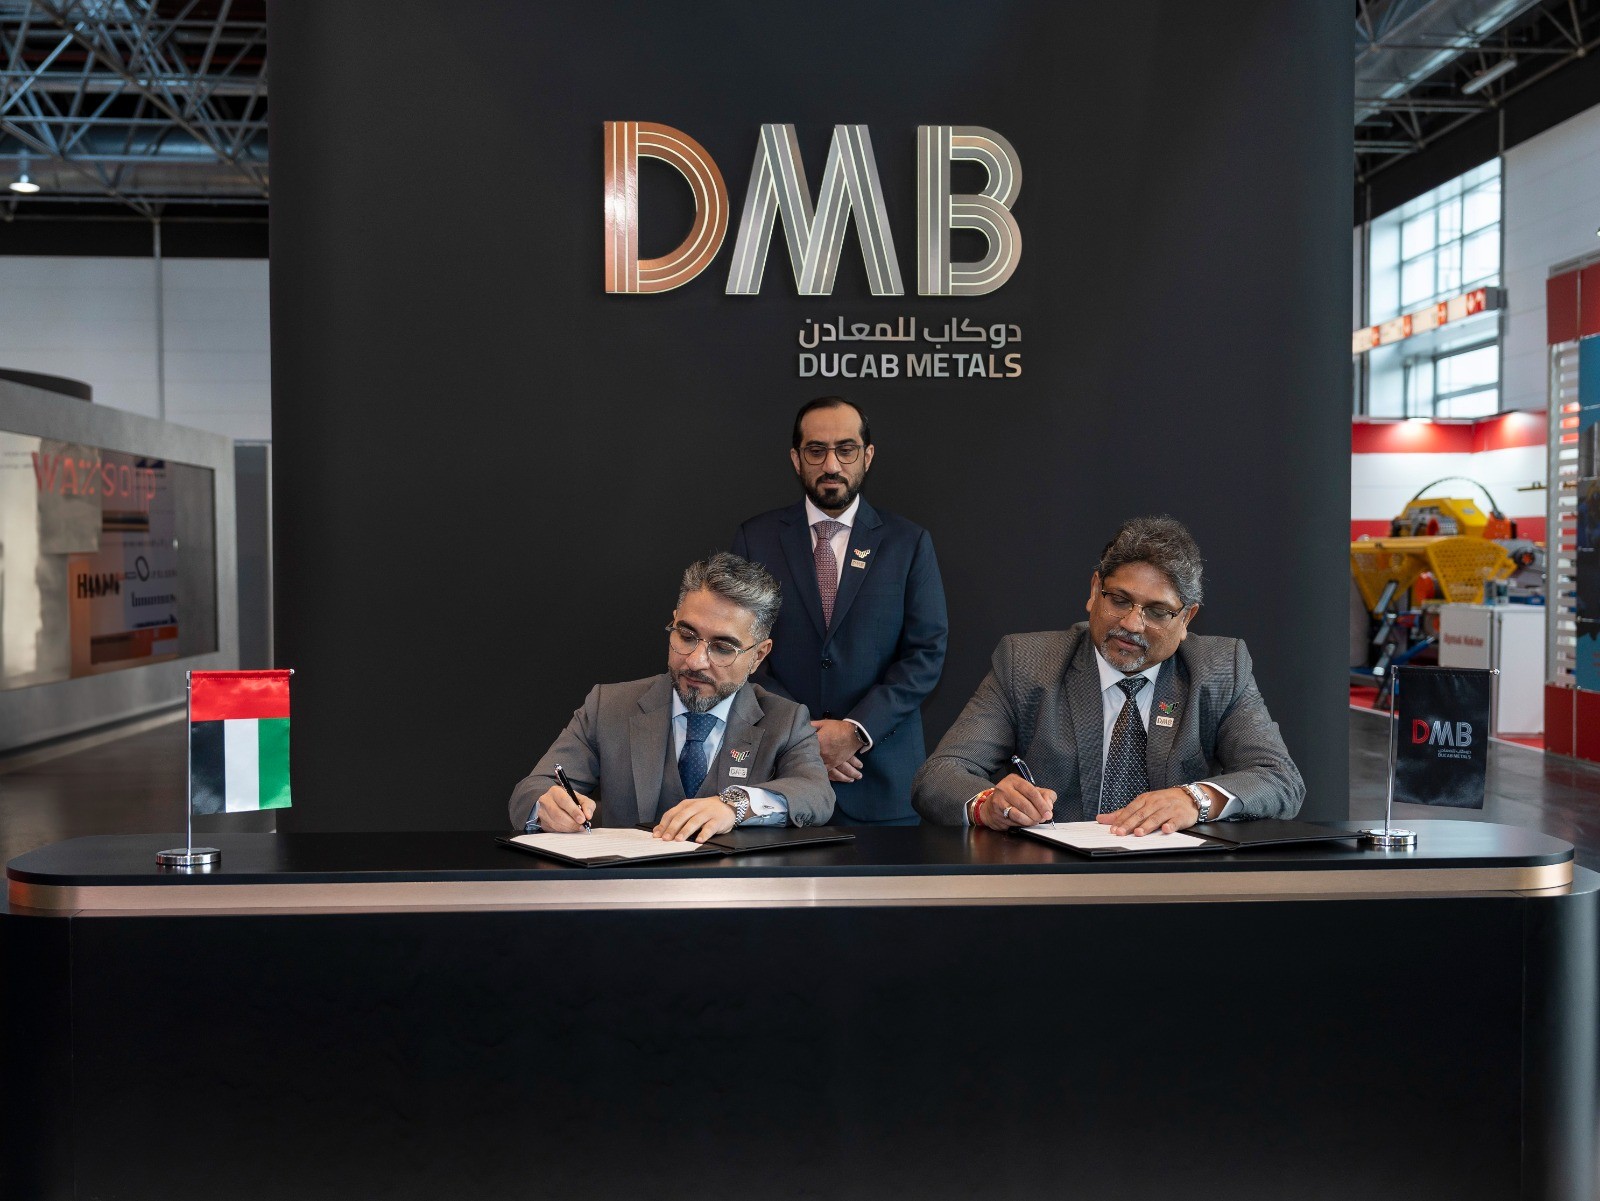 Photo: Ducab Metals Business Strengthens Global Position with GIC Magnet Acquisition, Projecting an Additional USD 40.5 Million in Revenue